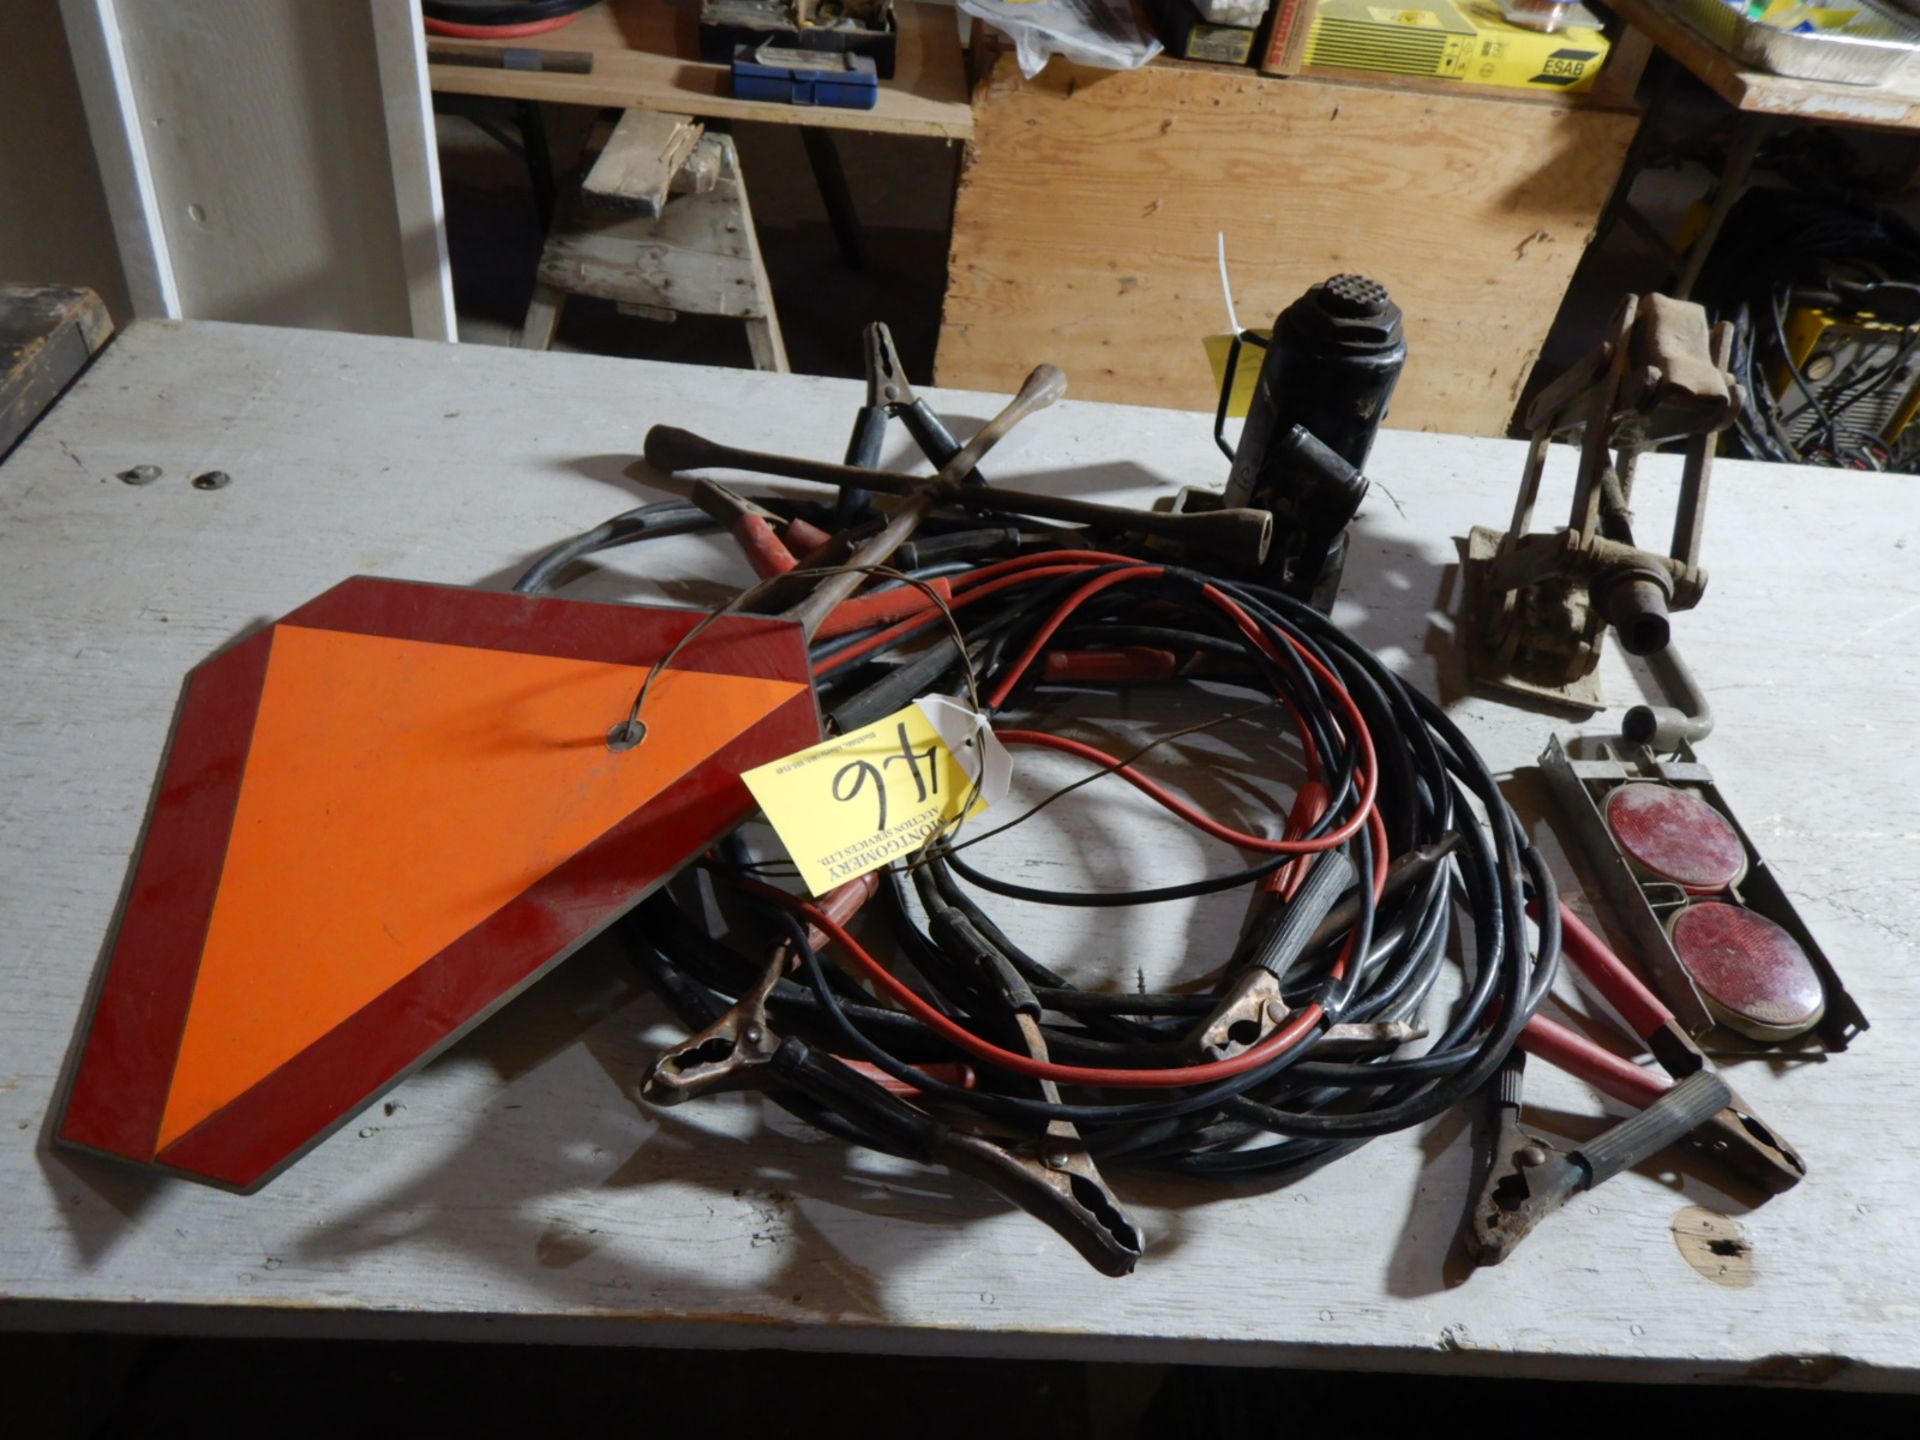 BATTERY BOOSTER CABLES, SLOW MOVING SIGN, BOTTLE JACK, ETC - Image 2 of 2